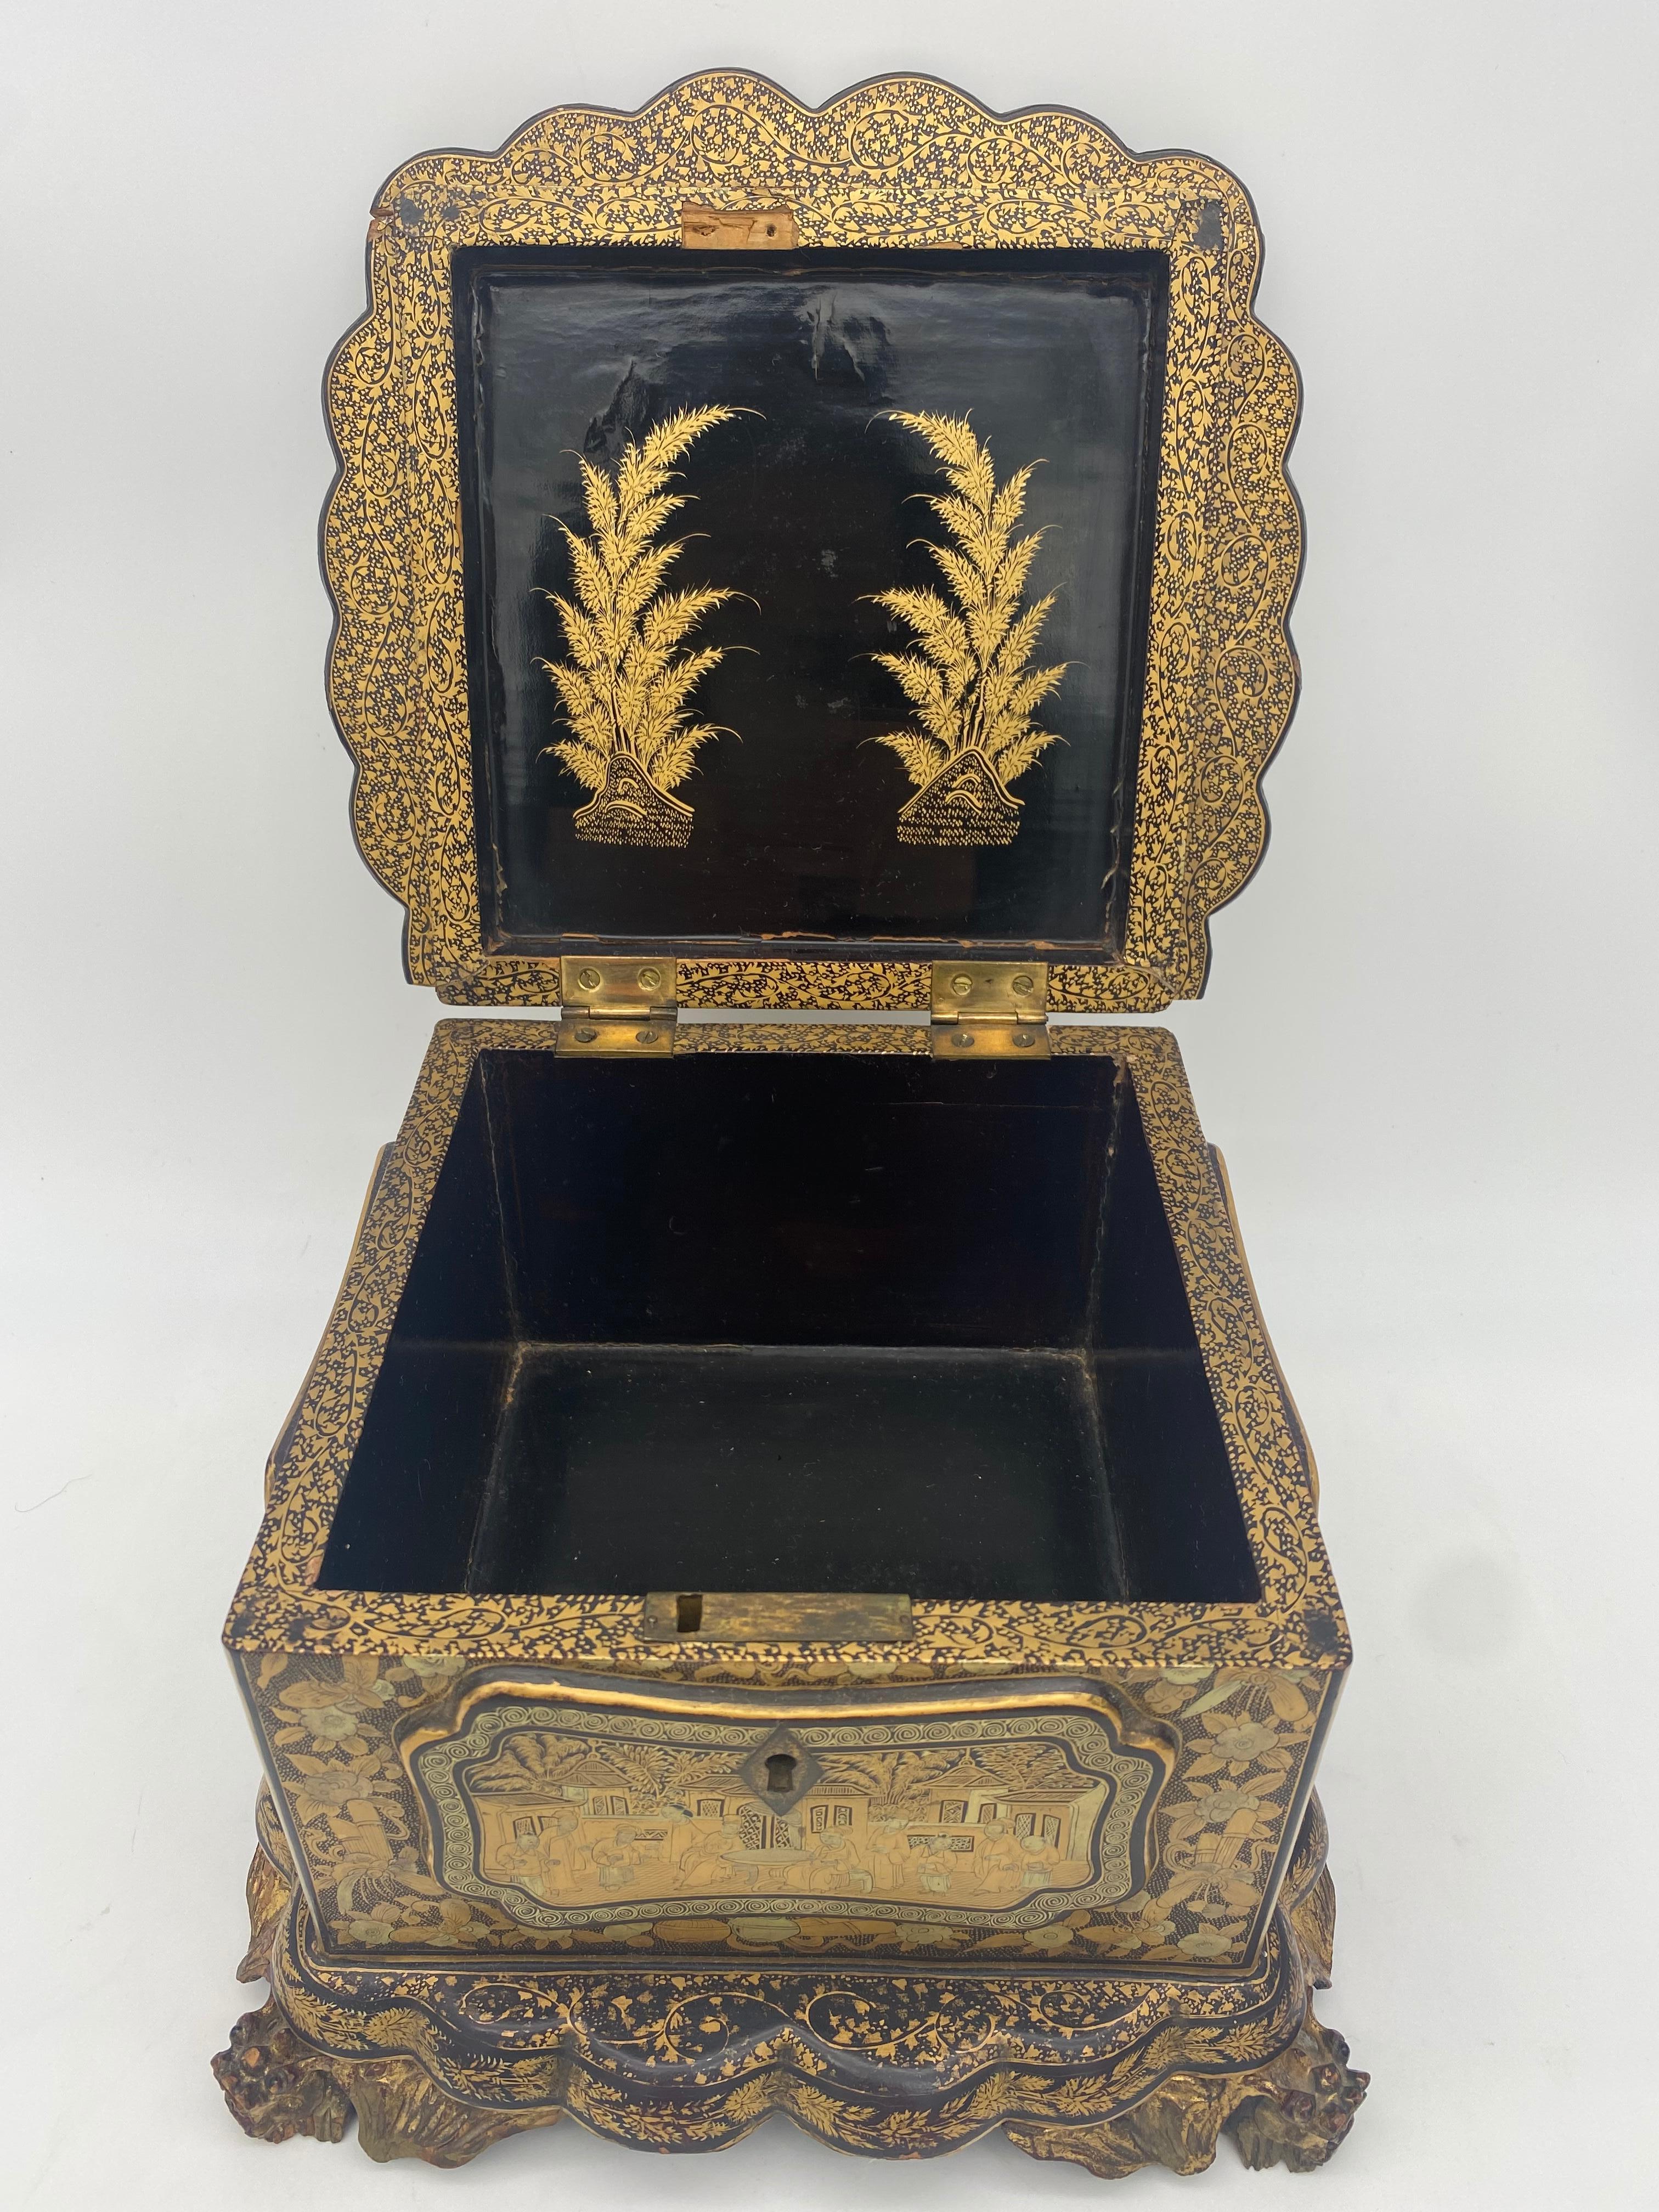 Unique 19th century export Chinese gilt chinoiserie lacquer box with hand painted scenes gilt export black lacquer, this box has a unique shape, it is footed with a scalloped rim around the lid and the base. The lid is hinged, the feet are open